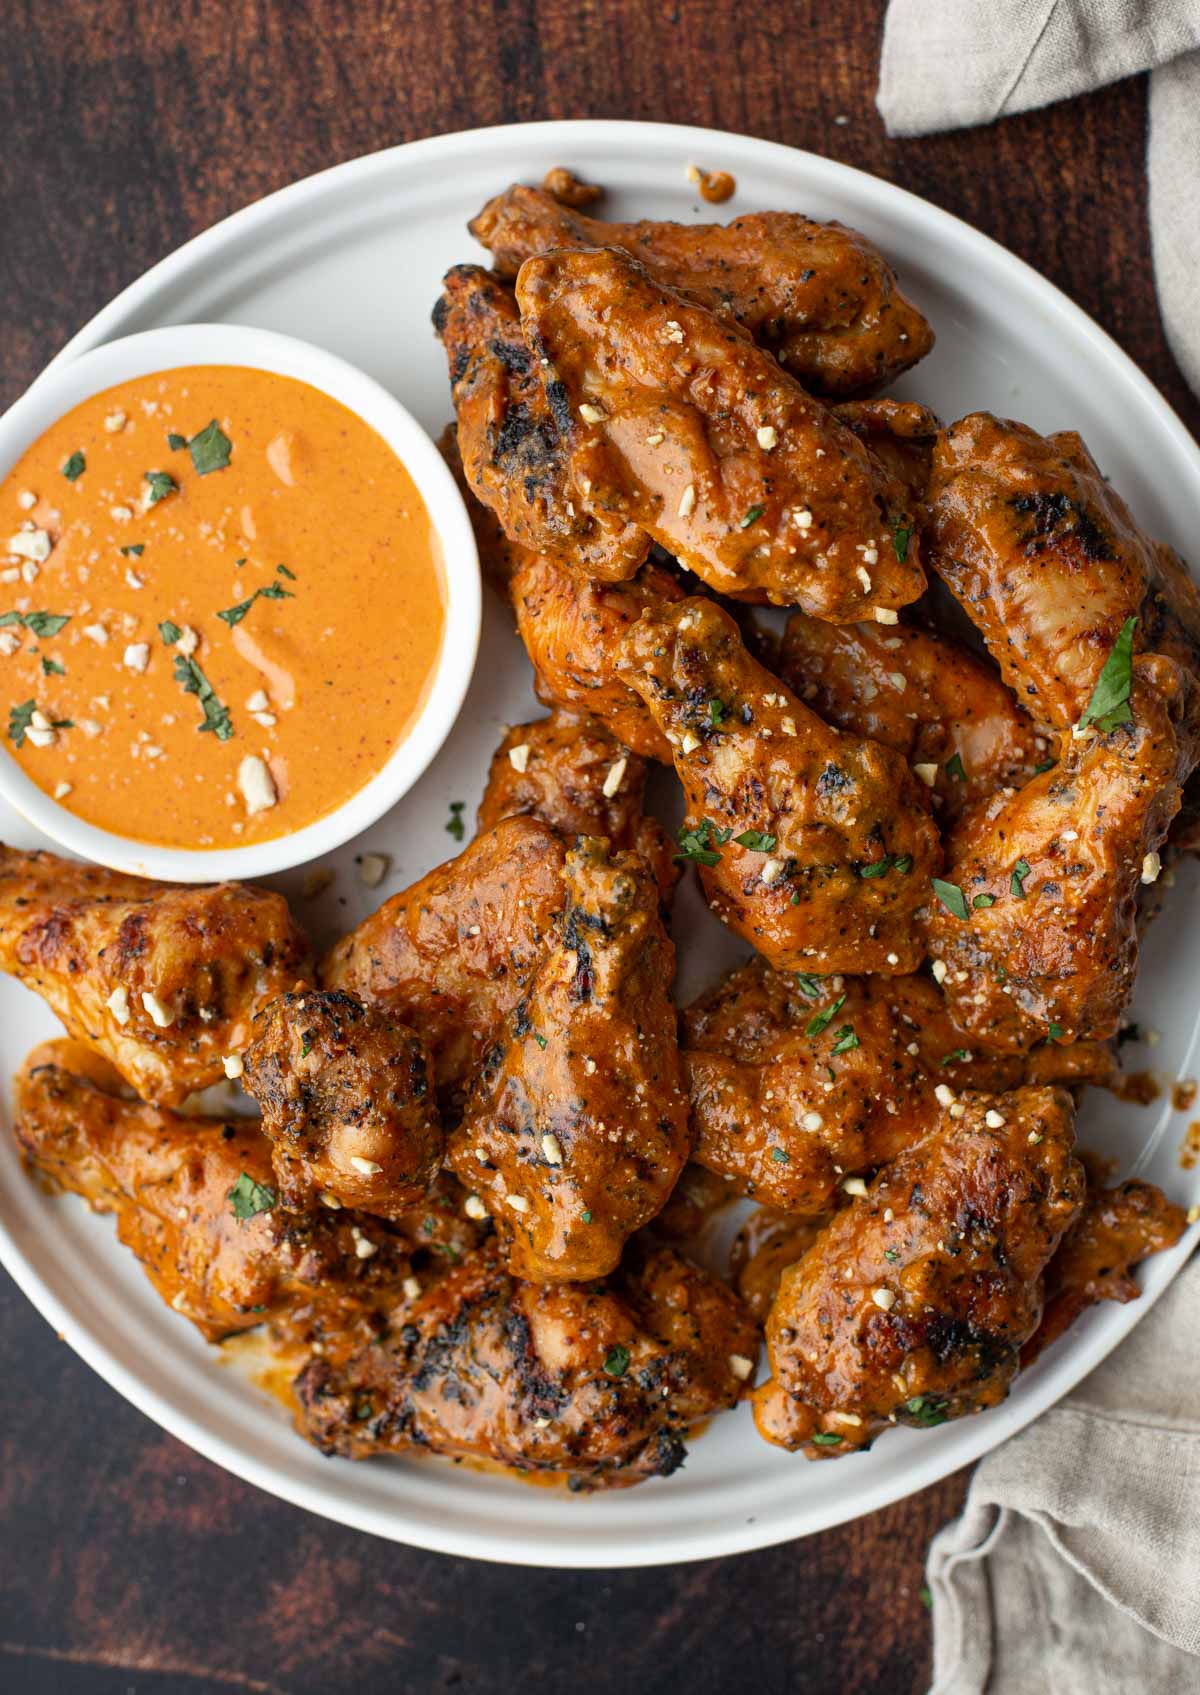 https://www.vindulge.com/wp-content/uploads/2022/02/Grilled-Chicken-Wings-with-Spicy-Peanut-Sauce.jpg